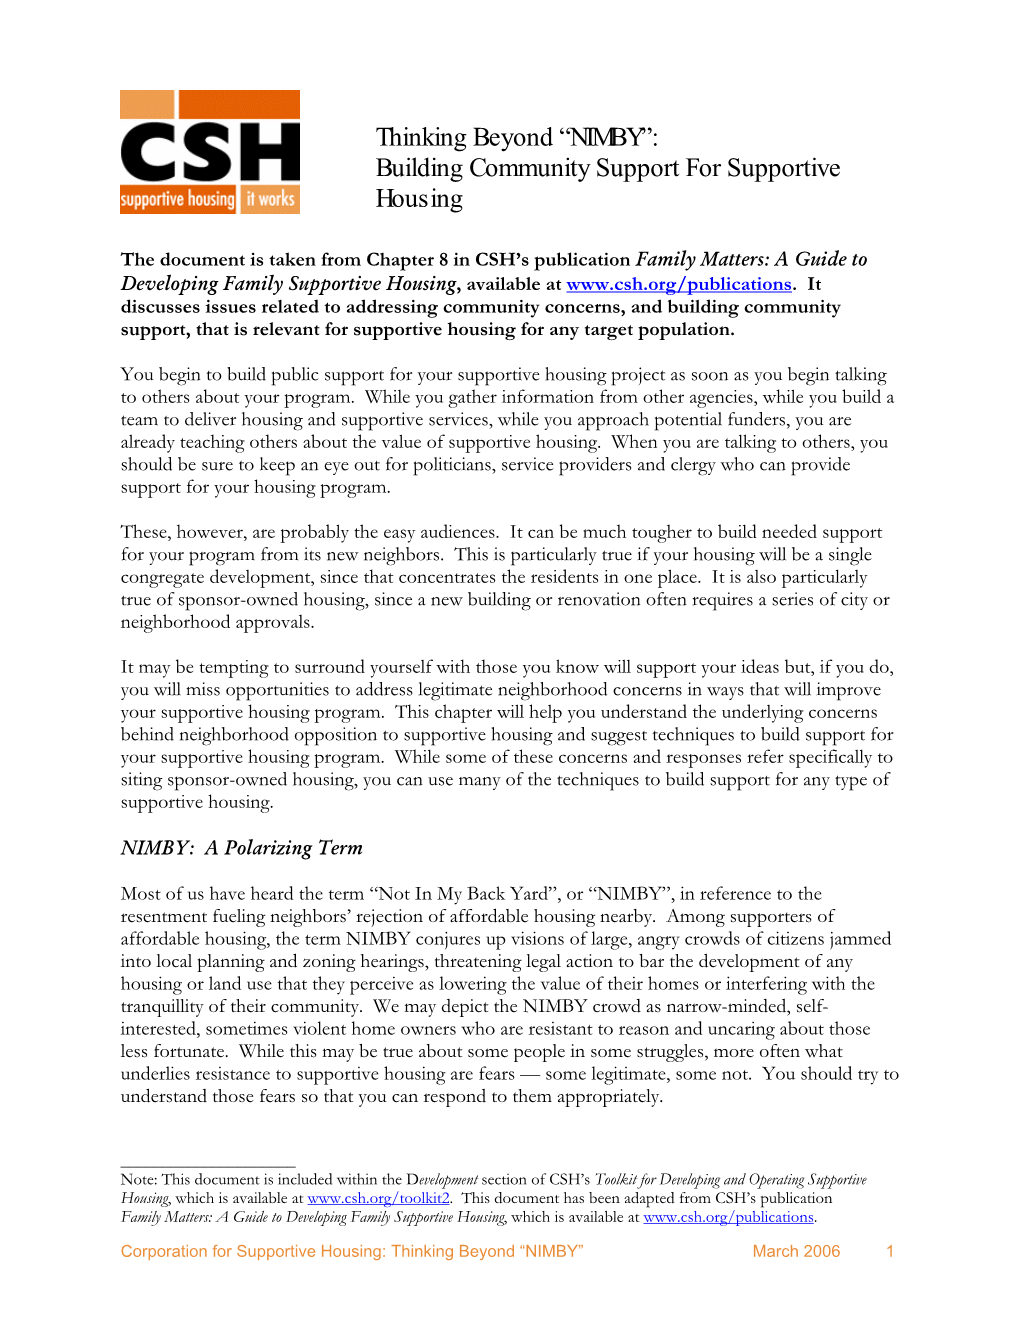 NIMBY”: Building Community Support for Supportive Housing